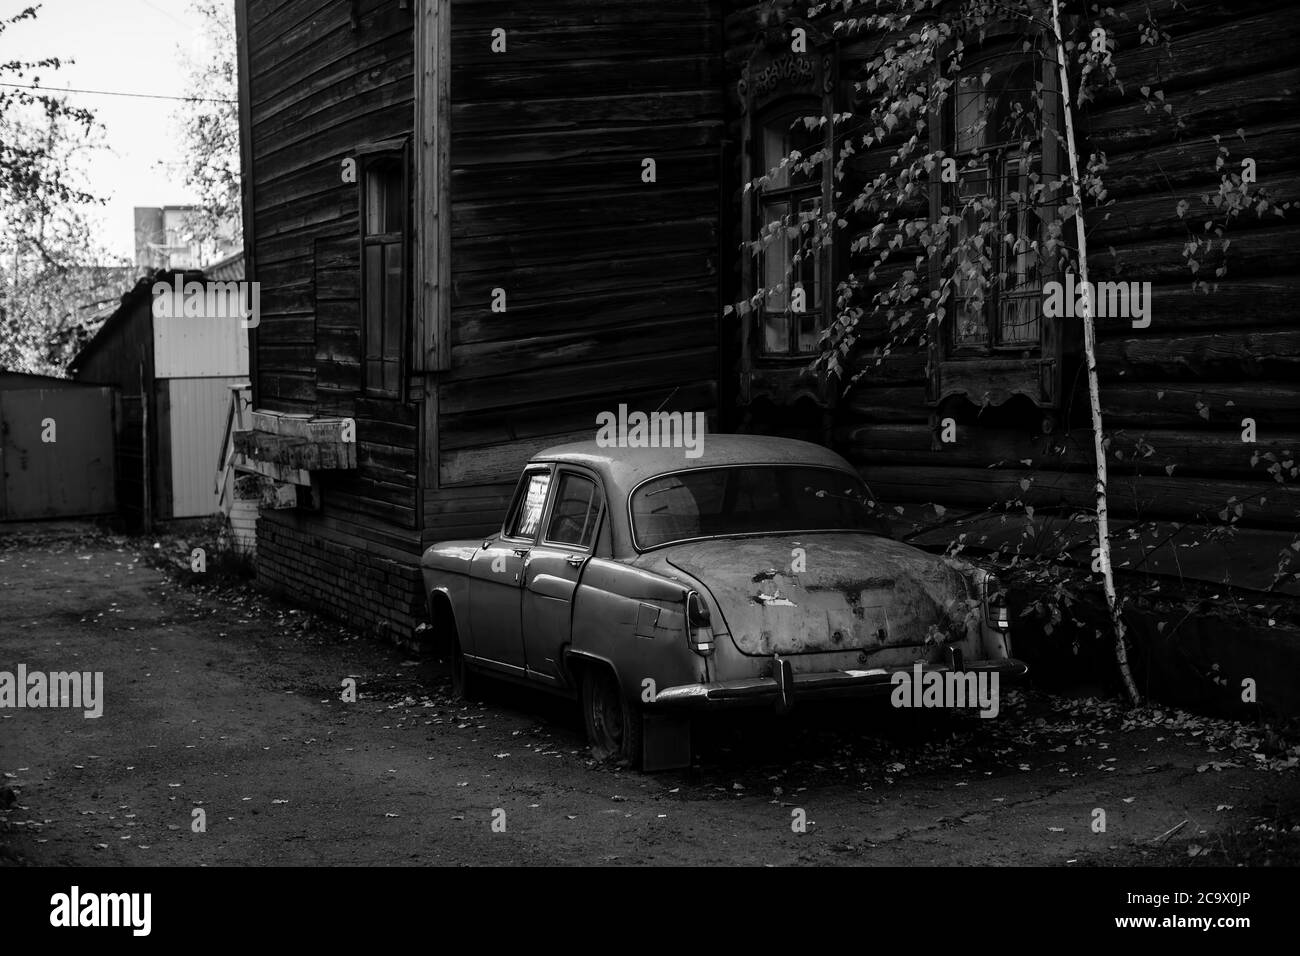 Vintage car near the wooden hause in Tomsk, Siberia. Black and white photo. Stock Photo